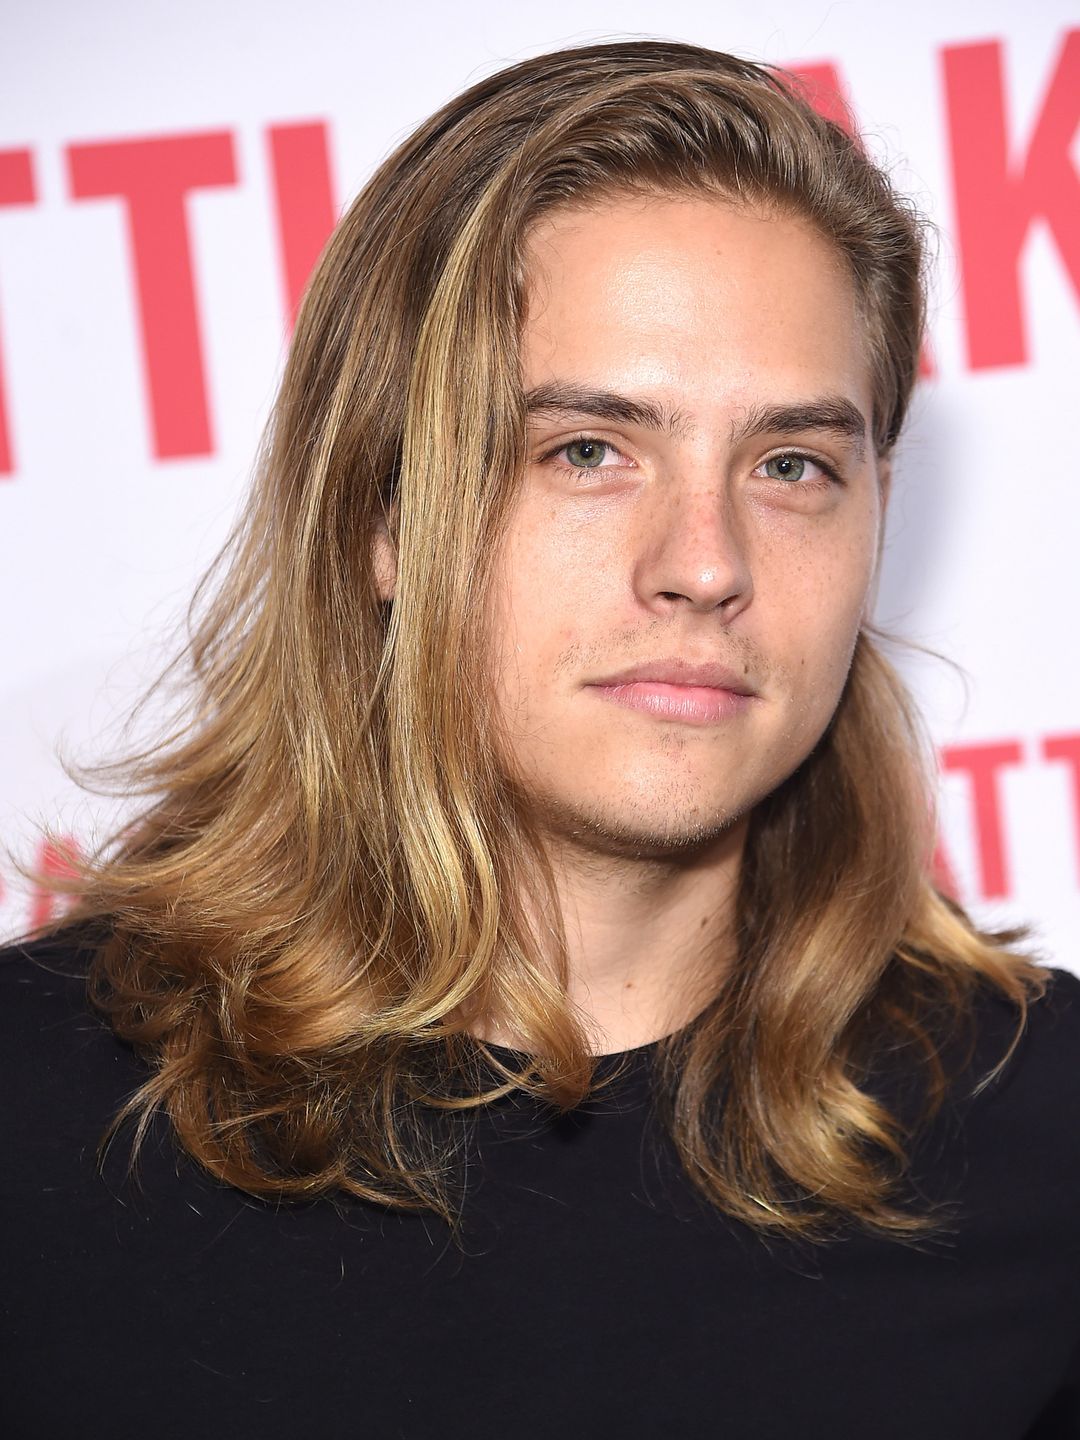 Dylan Sprouse early childhood